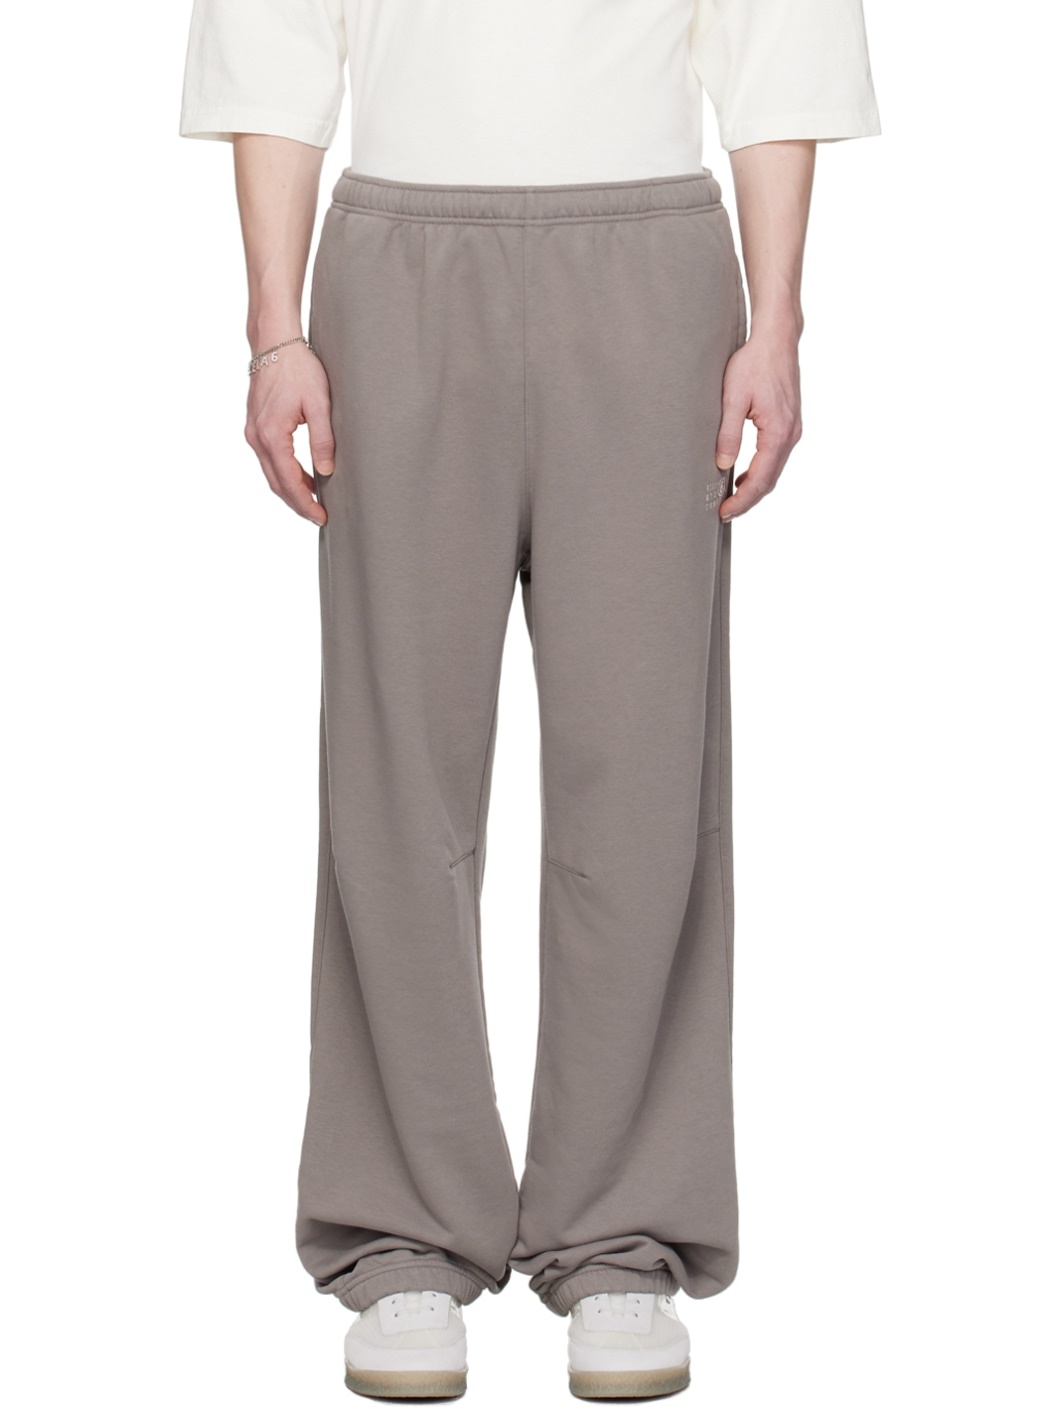 Taupe Embroidered Sweatpants - 1